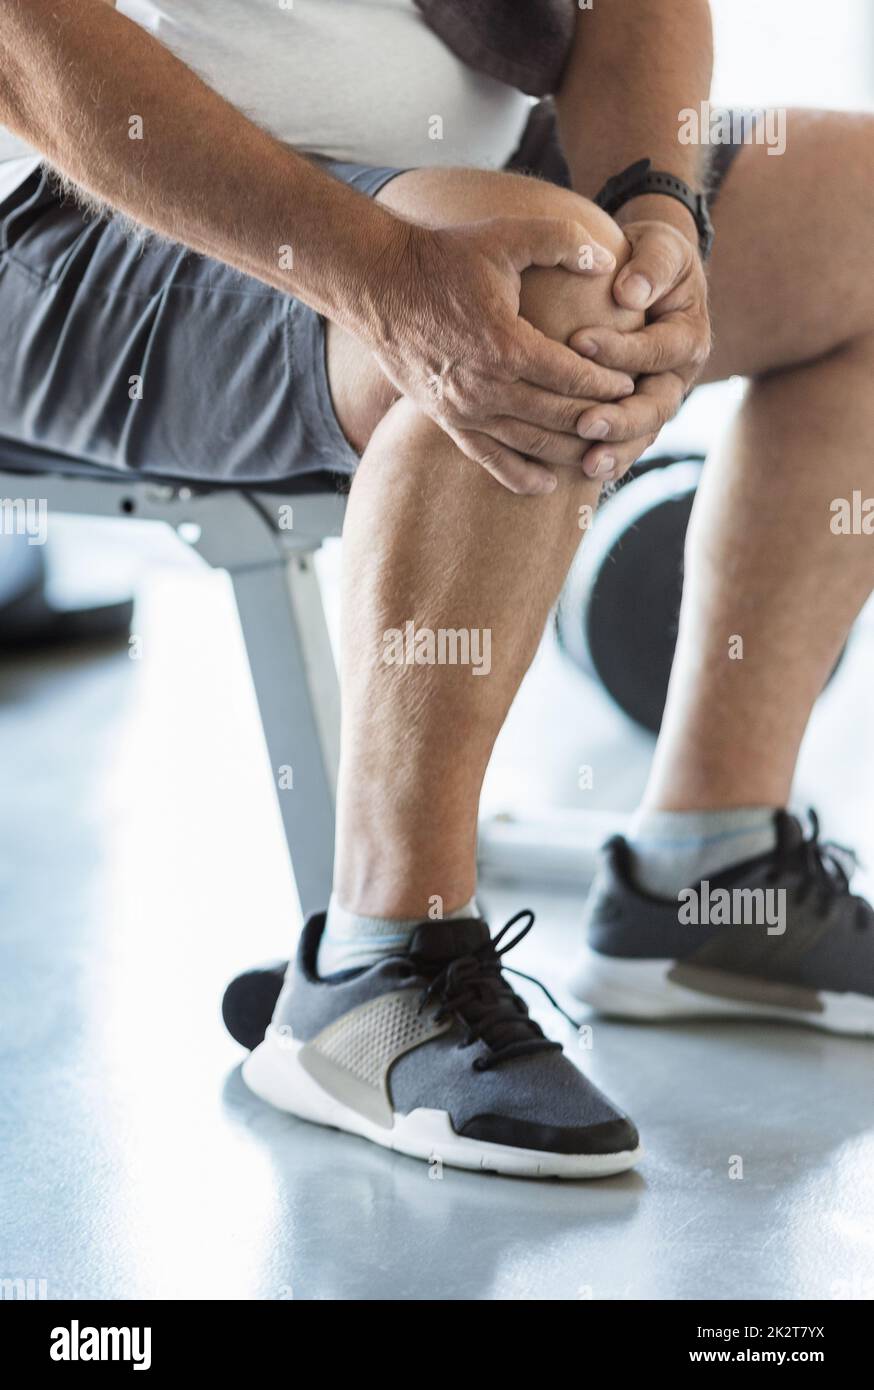 Active senior man in gym with knee injury Stock Photo